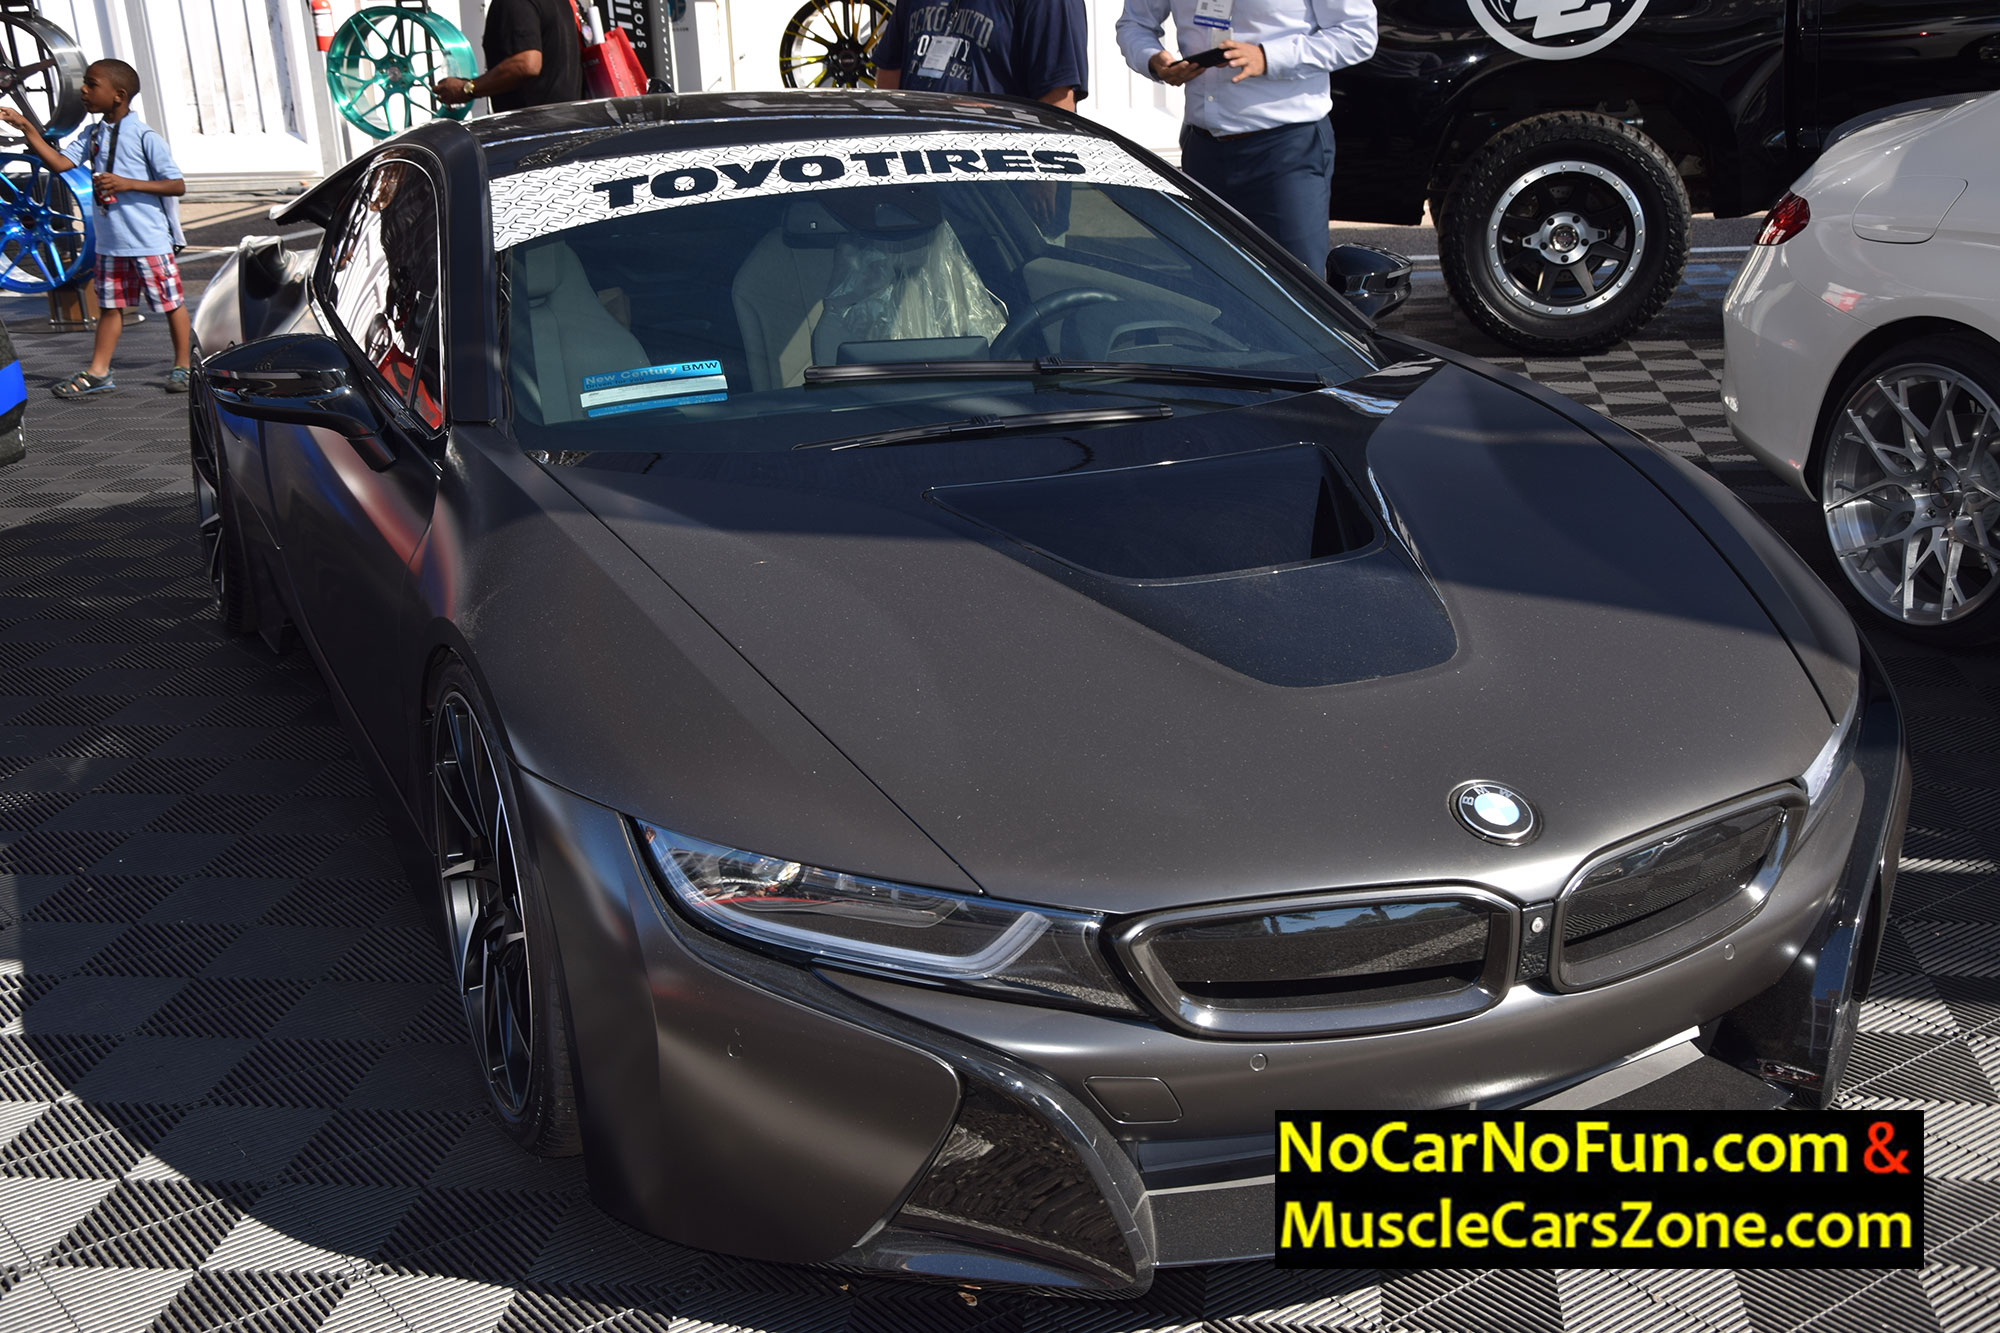 Import Cars Other Brands BMW - Sema Show 2016 Vegas